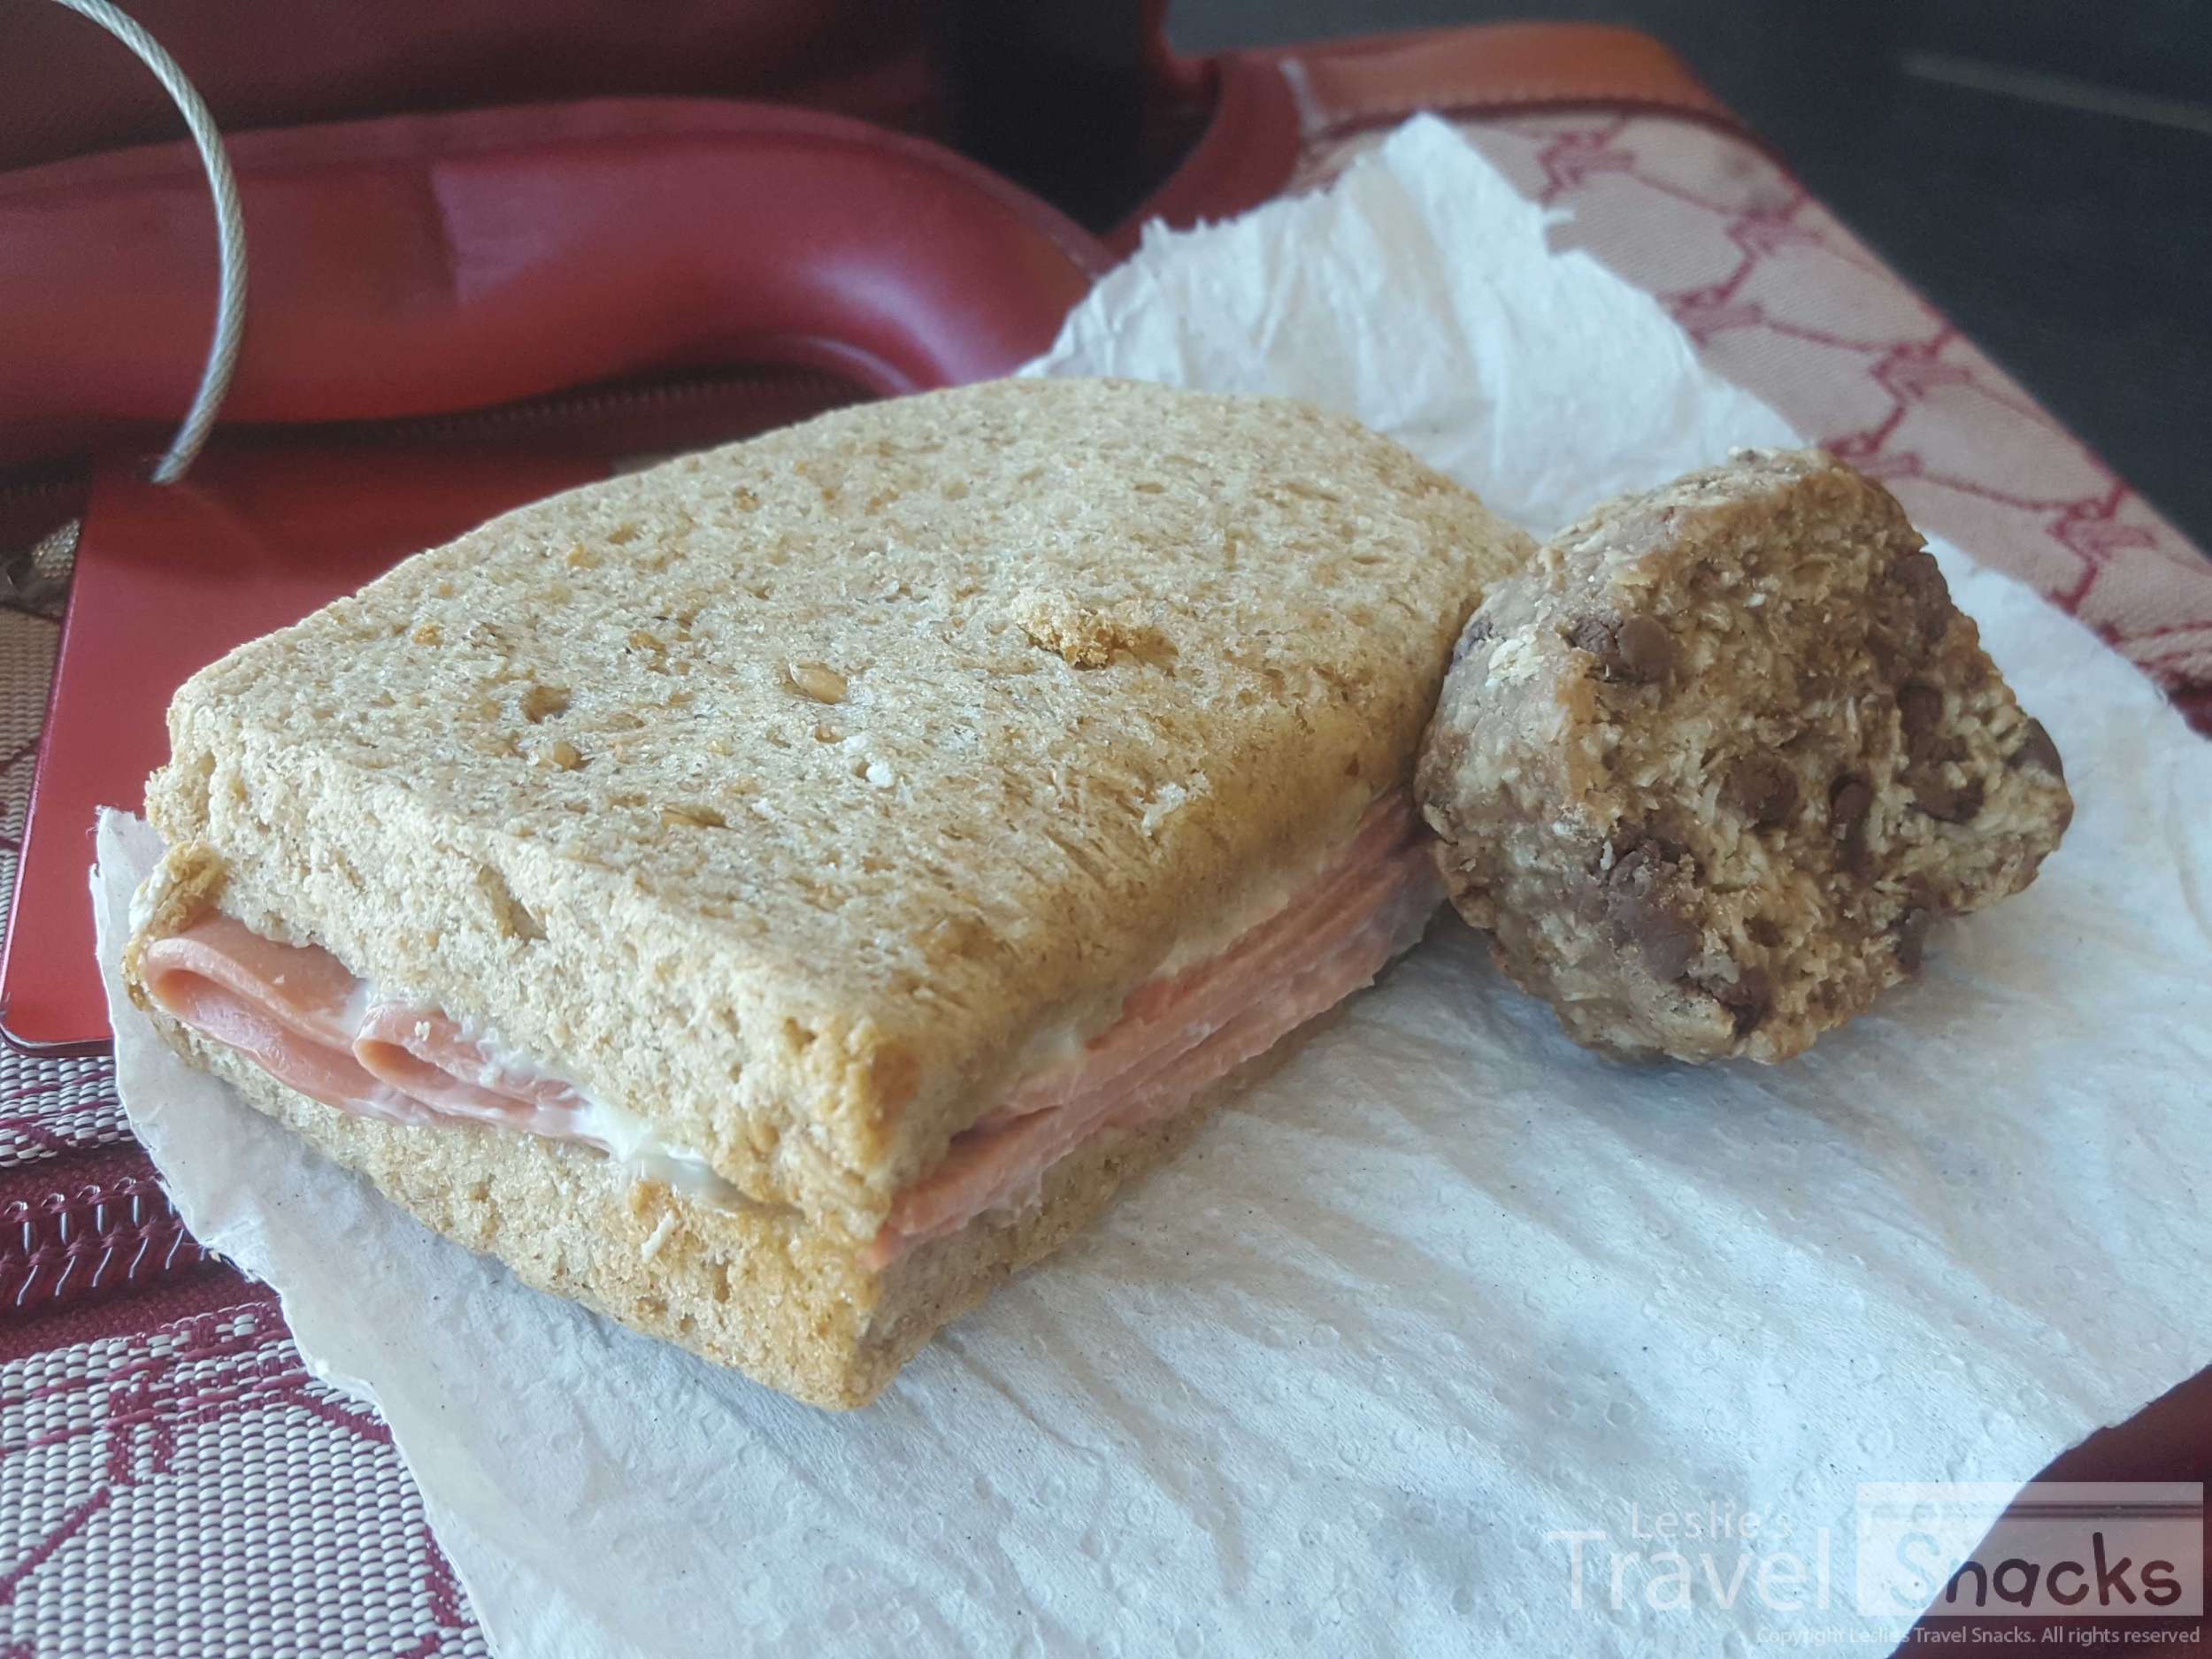 It may not be very exciting, but a sandwich and a cookie can save you about $15 in airport food!